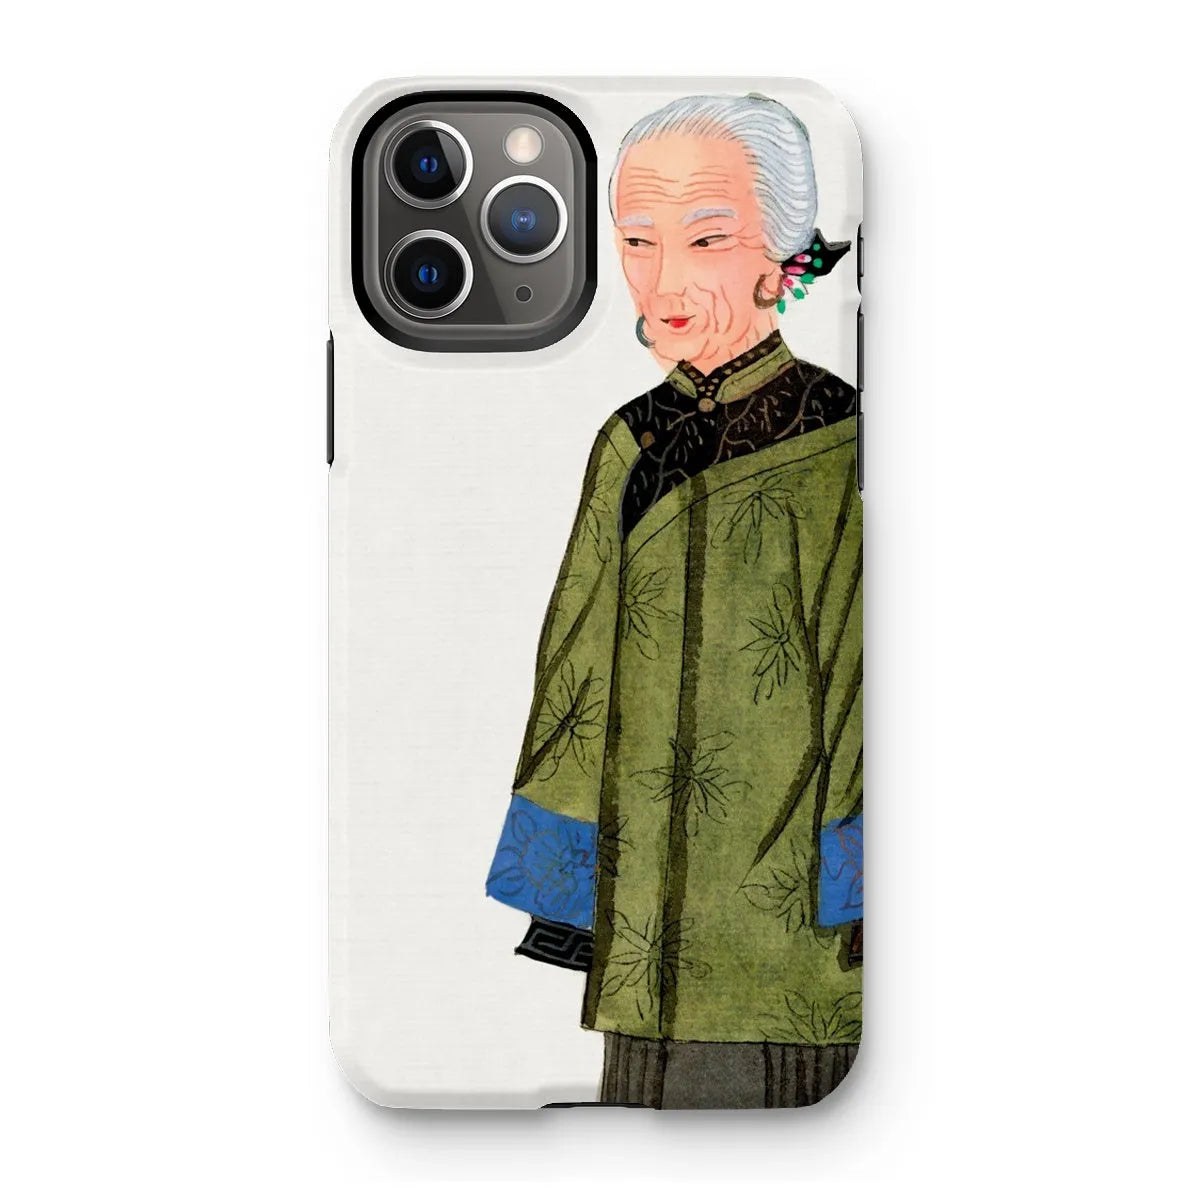 Grand Dame - Qing Chinese Aesthetic Art Phone Case - Iphone 11 Pro / Matte - Mobile Phone Cases - Aesthetic Art